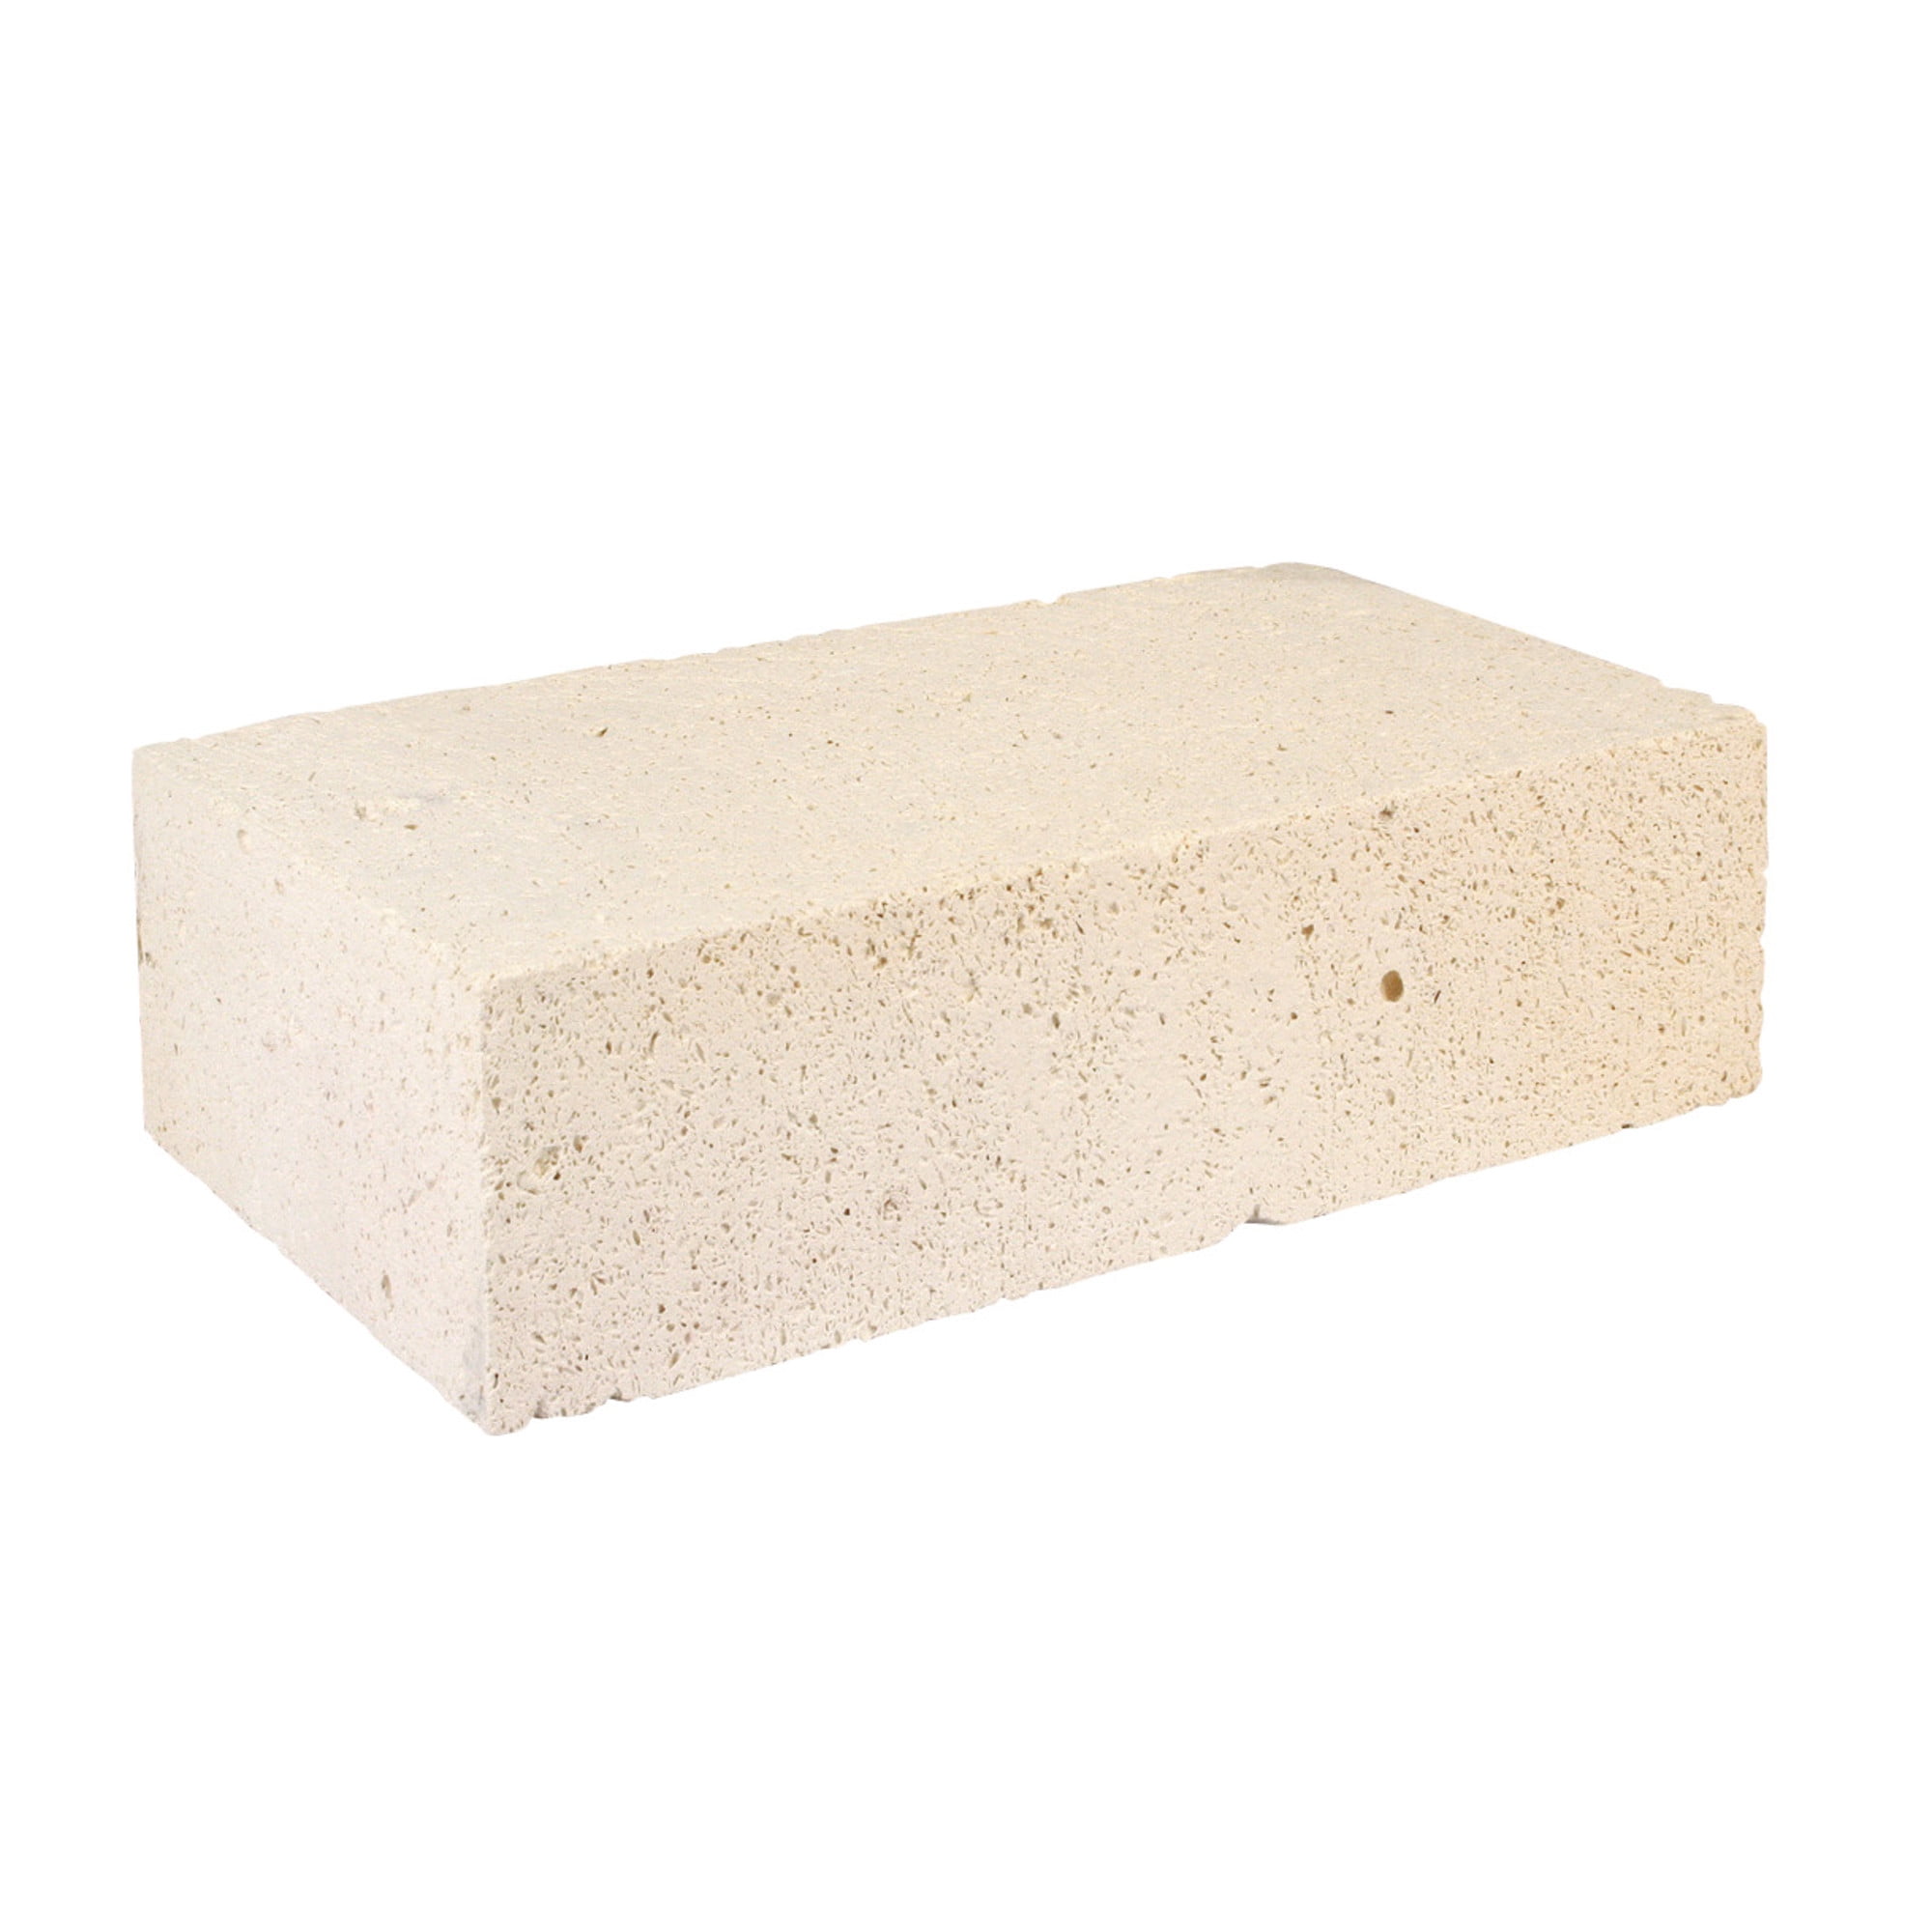 Insulating Fire Brick, 9 x 4.5 x 1.25, 2500F Rated, Set of 5 Fire Brick  for Pizza Ovens, Wood Stoves, Kilns, Fireplaces, Forges, Jewelry Soldering